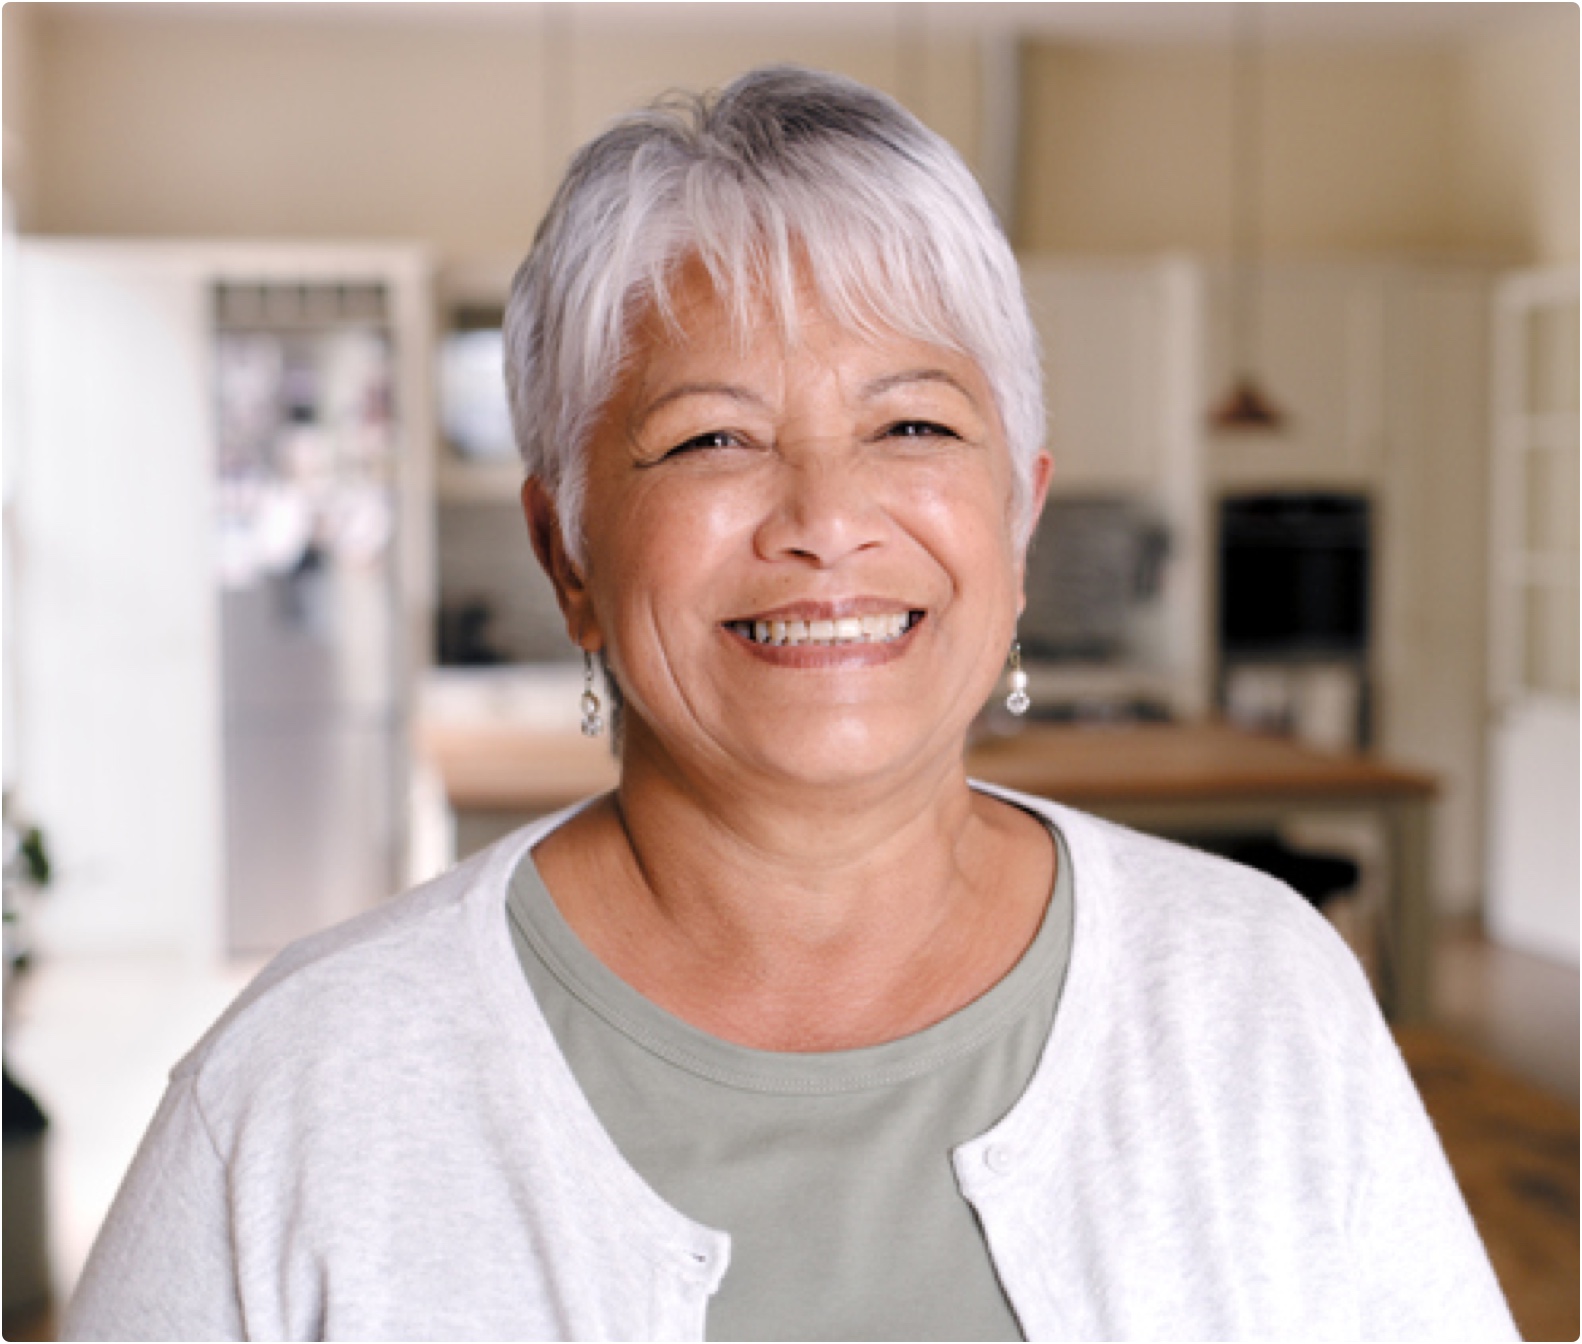 Stock photo of an older woman smiling.